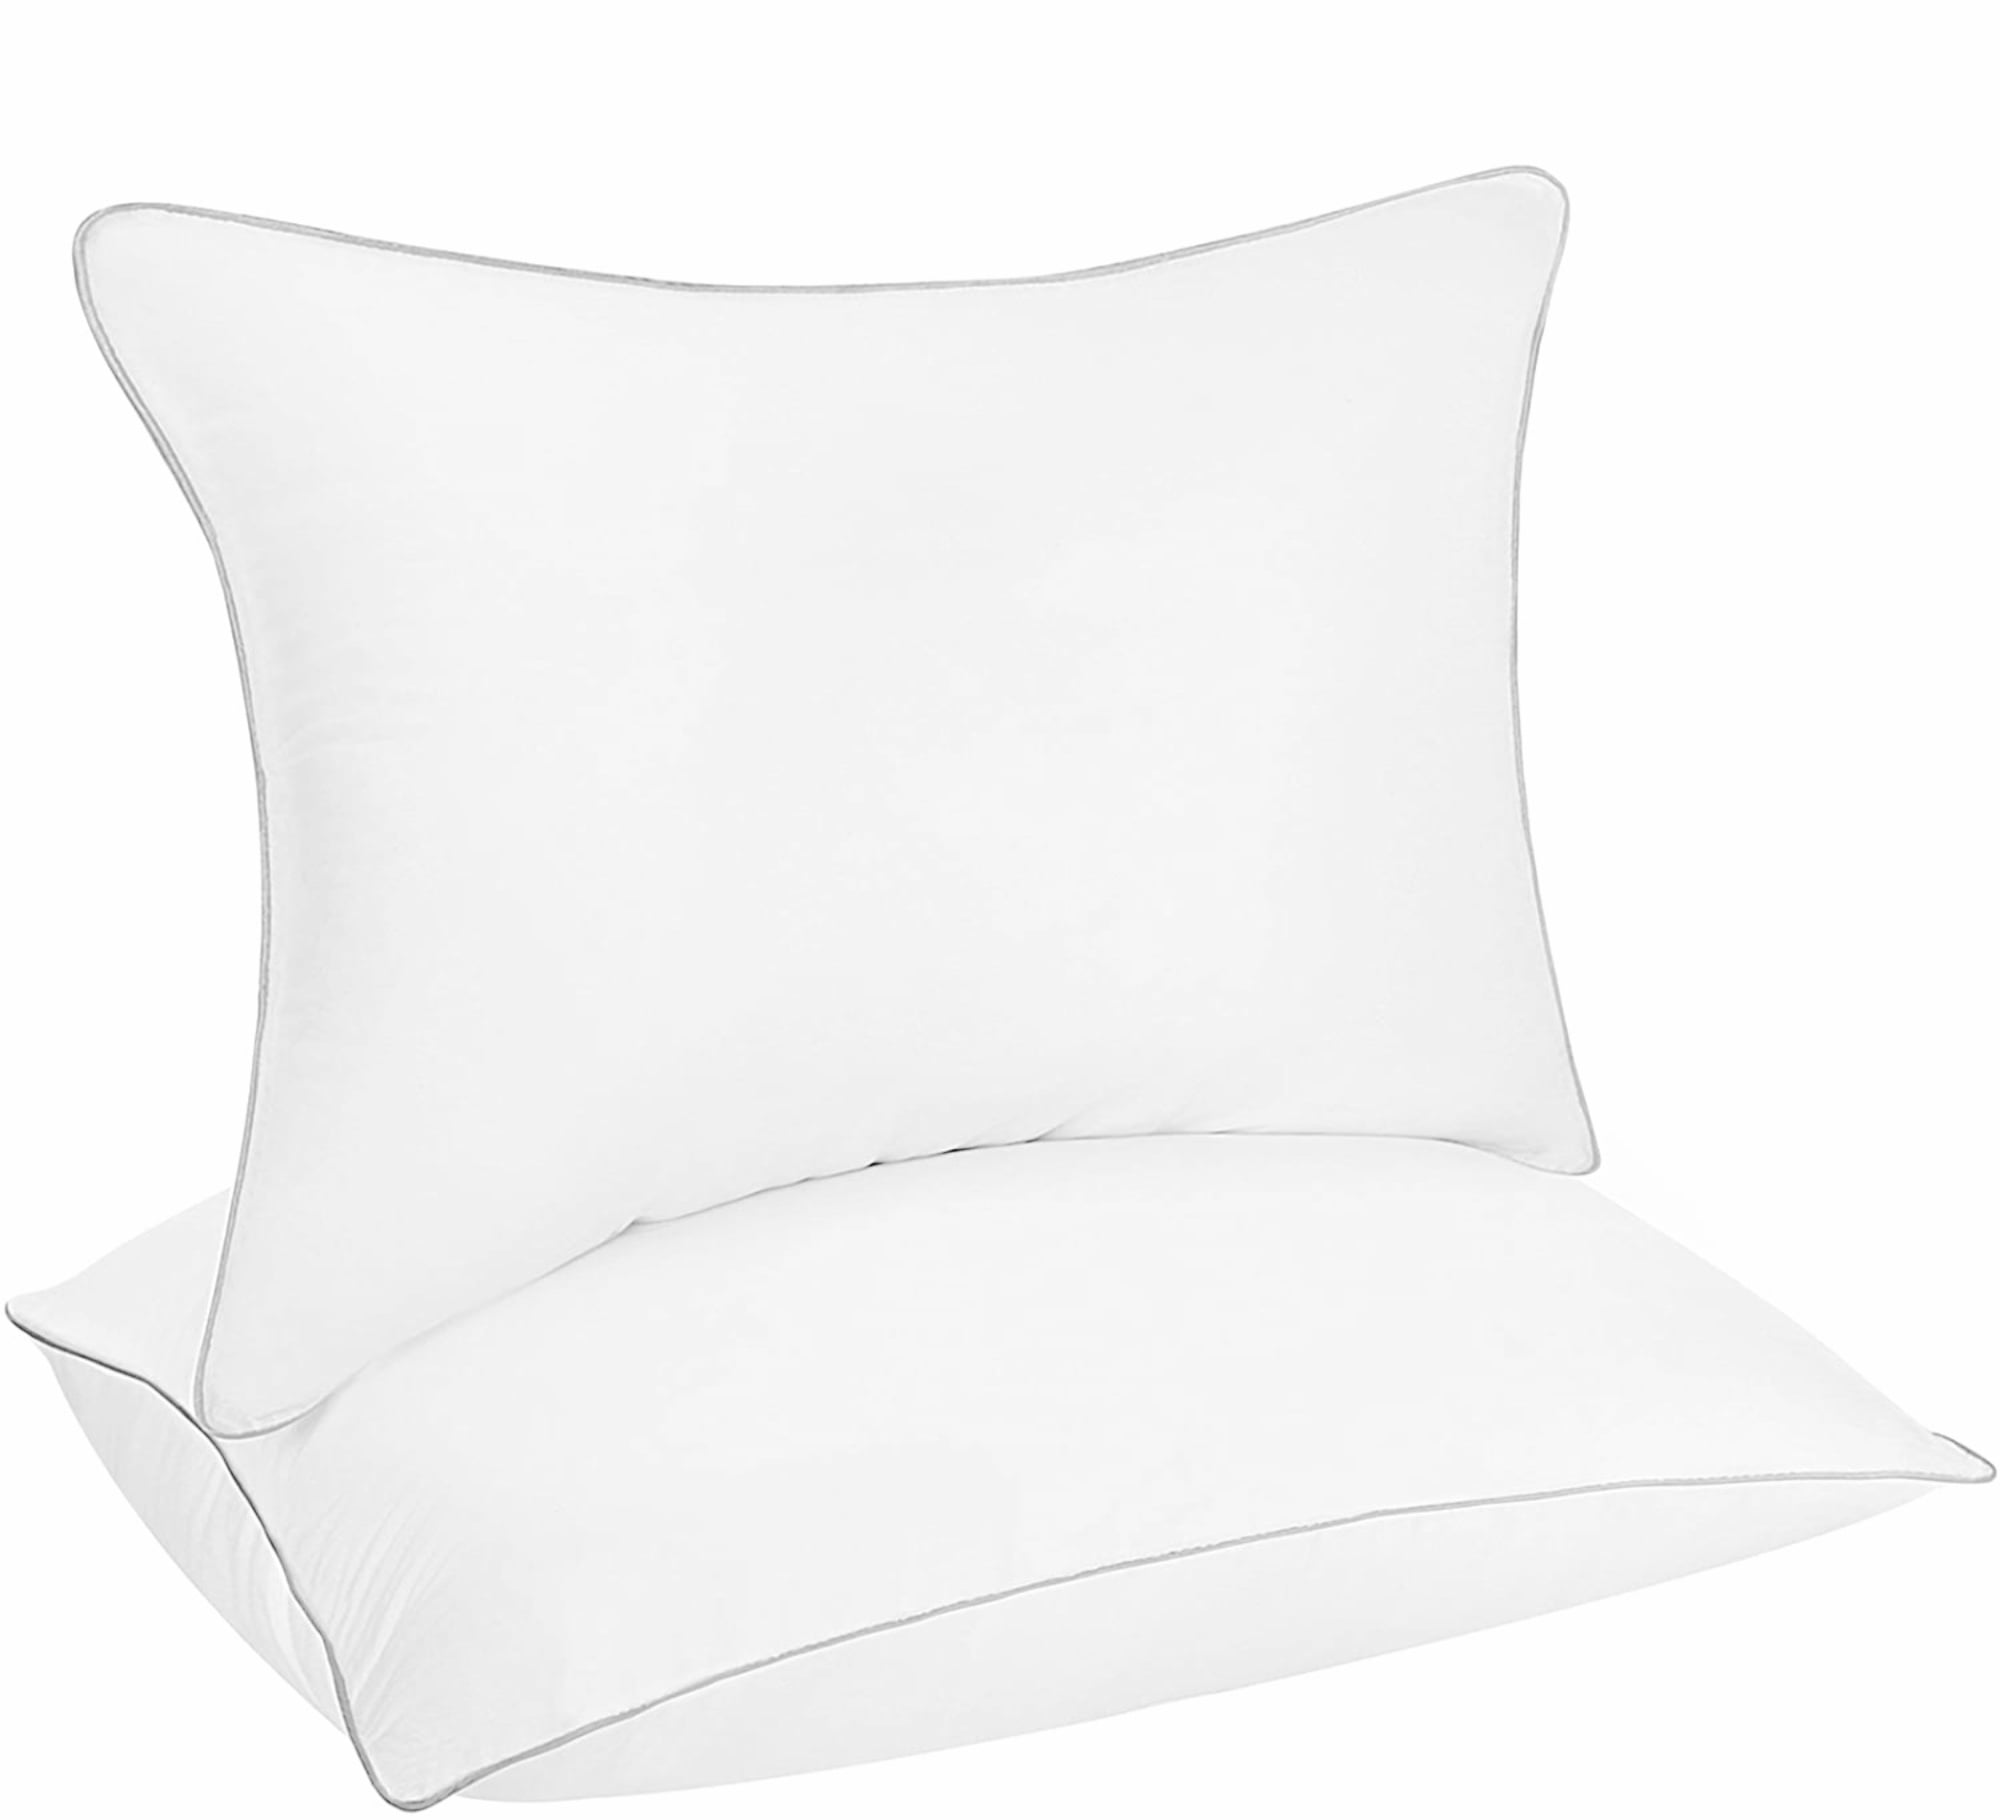 HOKEKI Bed Pillows for Sleeping Down Alternative Hypoallergenic Gel Fluffy Cooling Pillow for Back and Side Sleepers Stomach 20X30 White Set of 2 with Luxury Hotel Collection Quality Queen Size